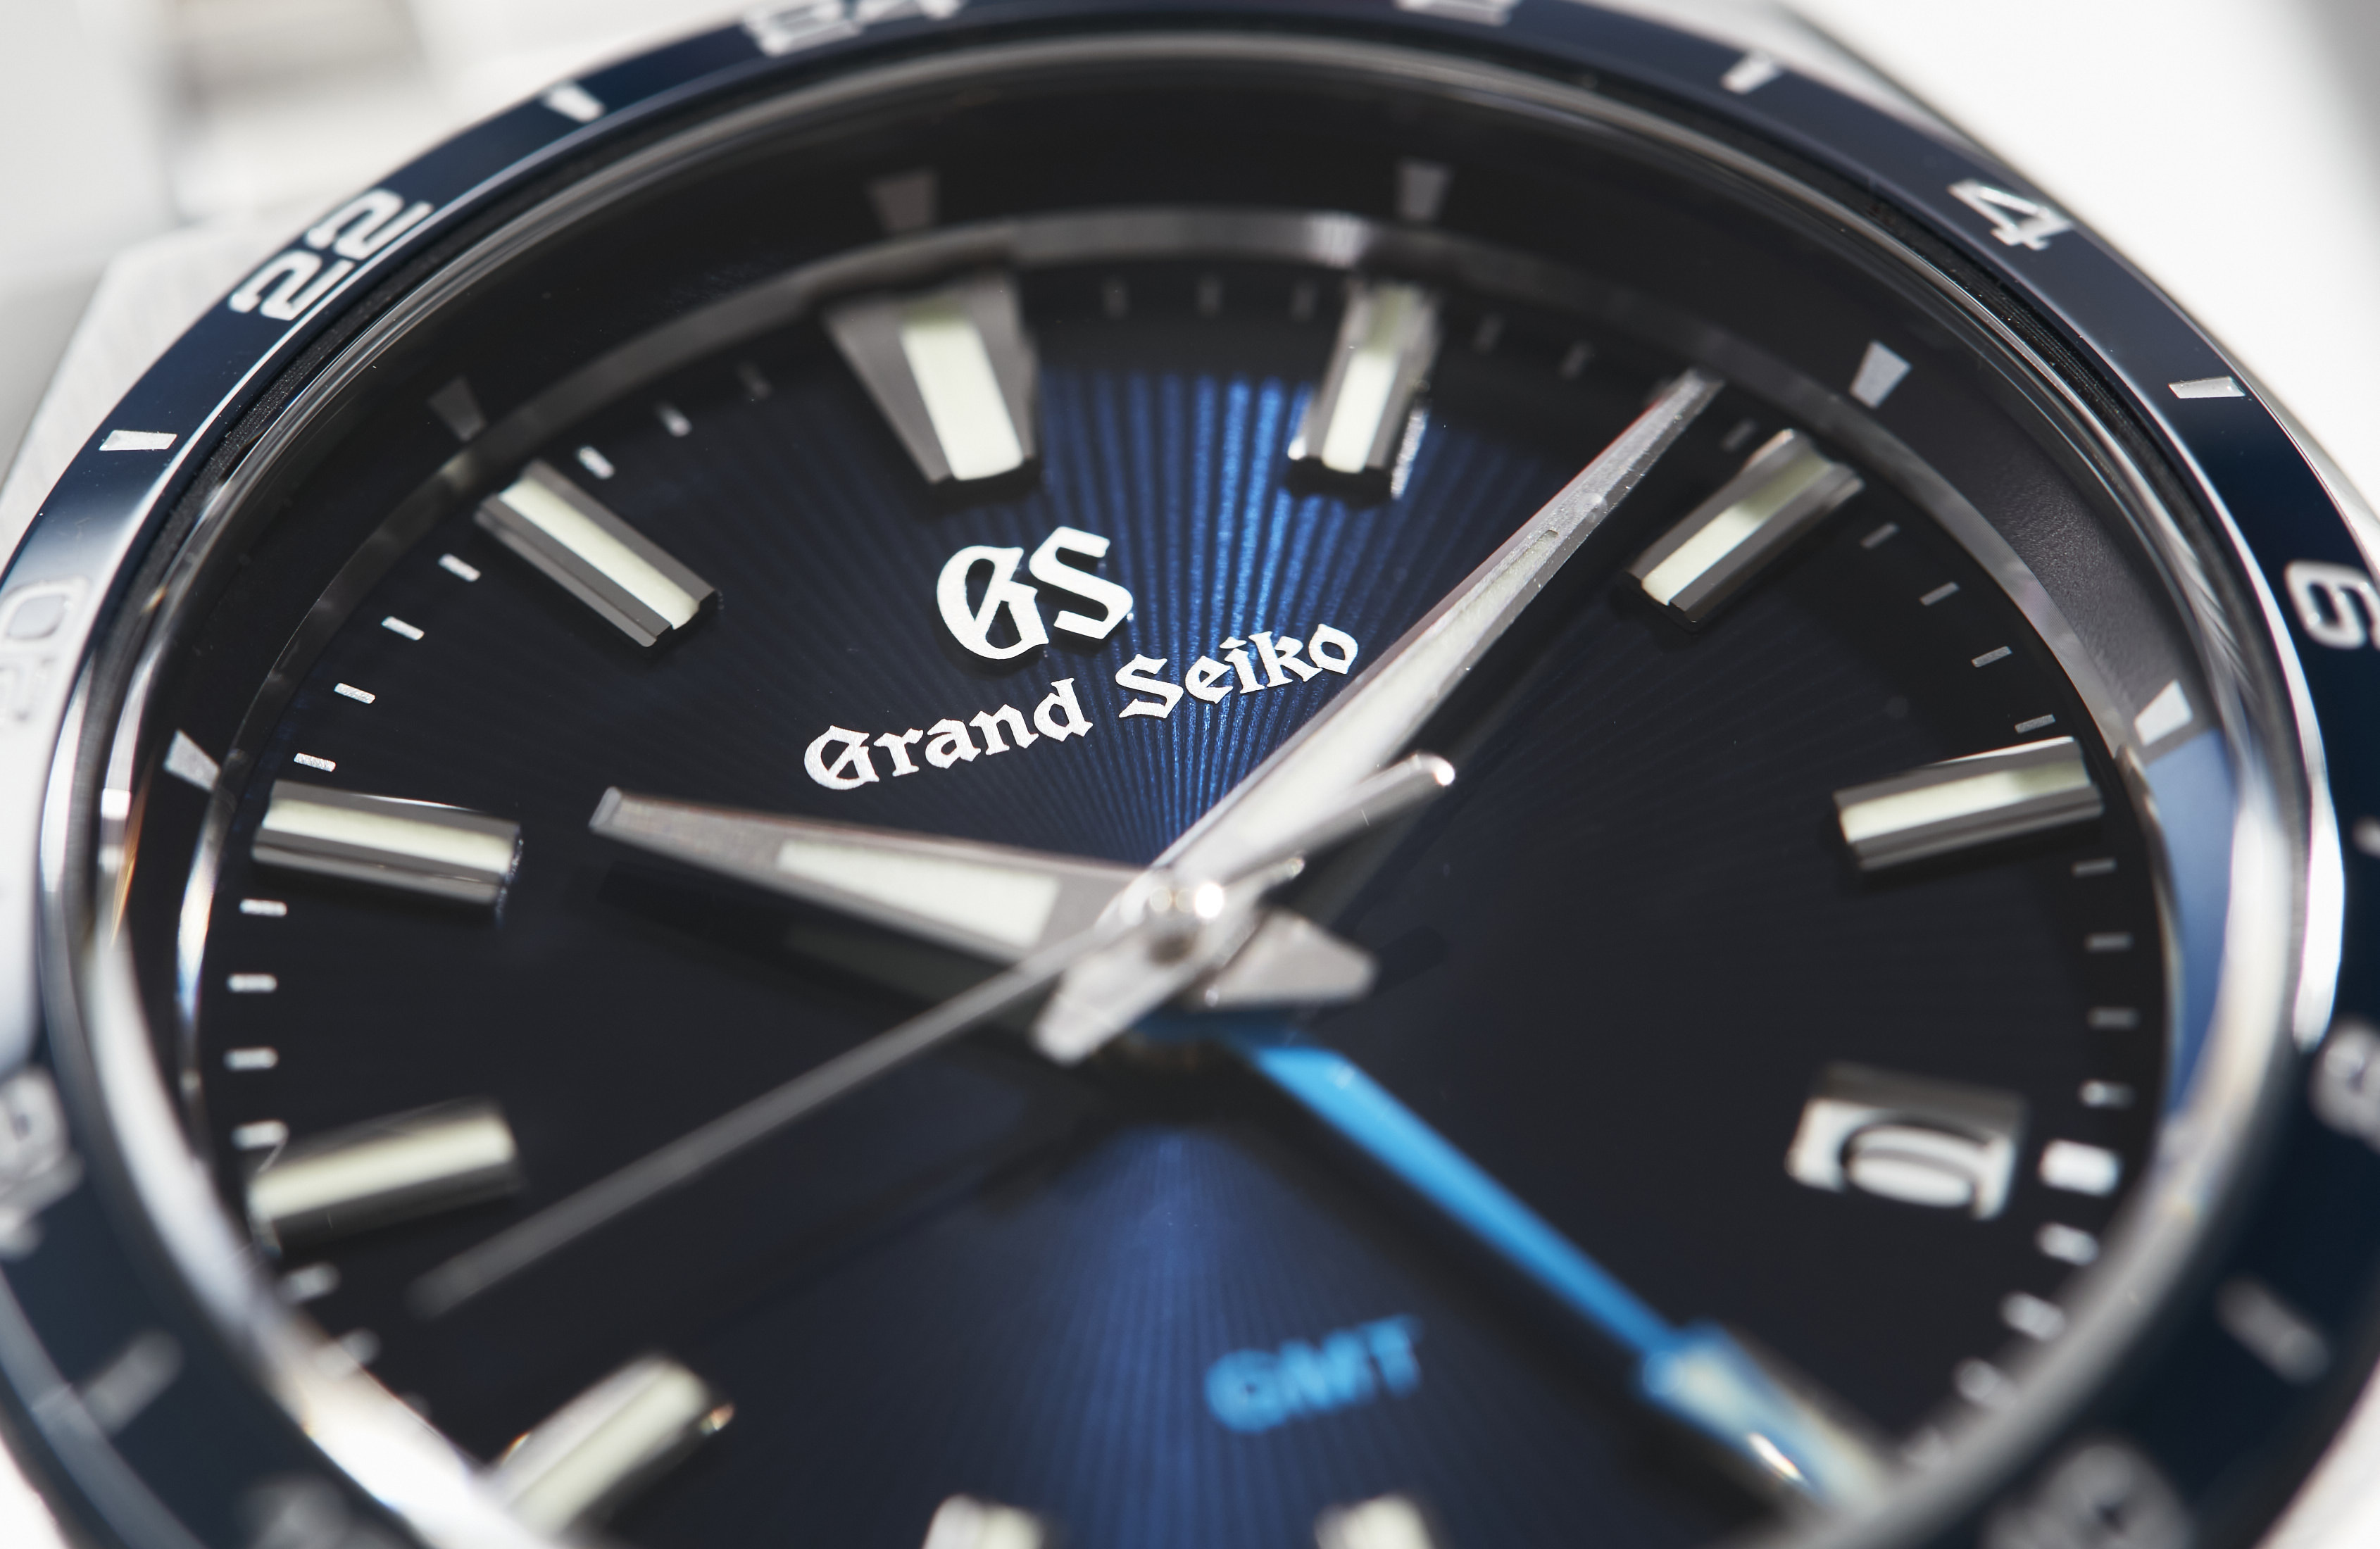 HANDS-ON: The Grand Seiko SBGN019 and SBGN021 are 